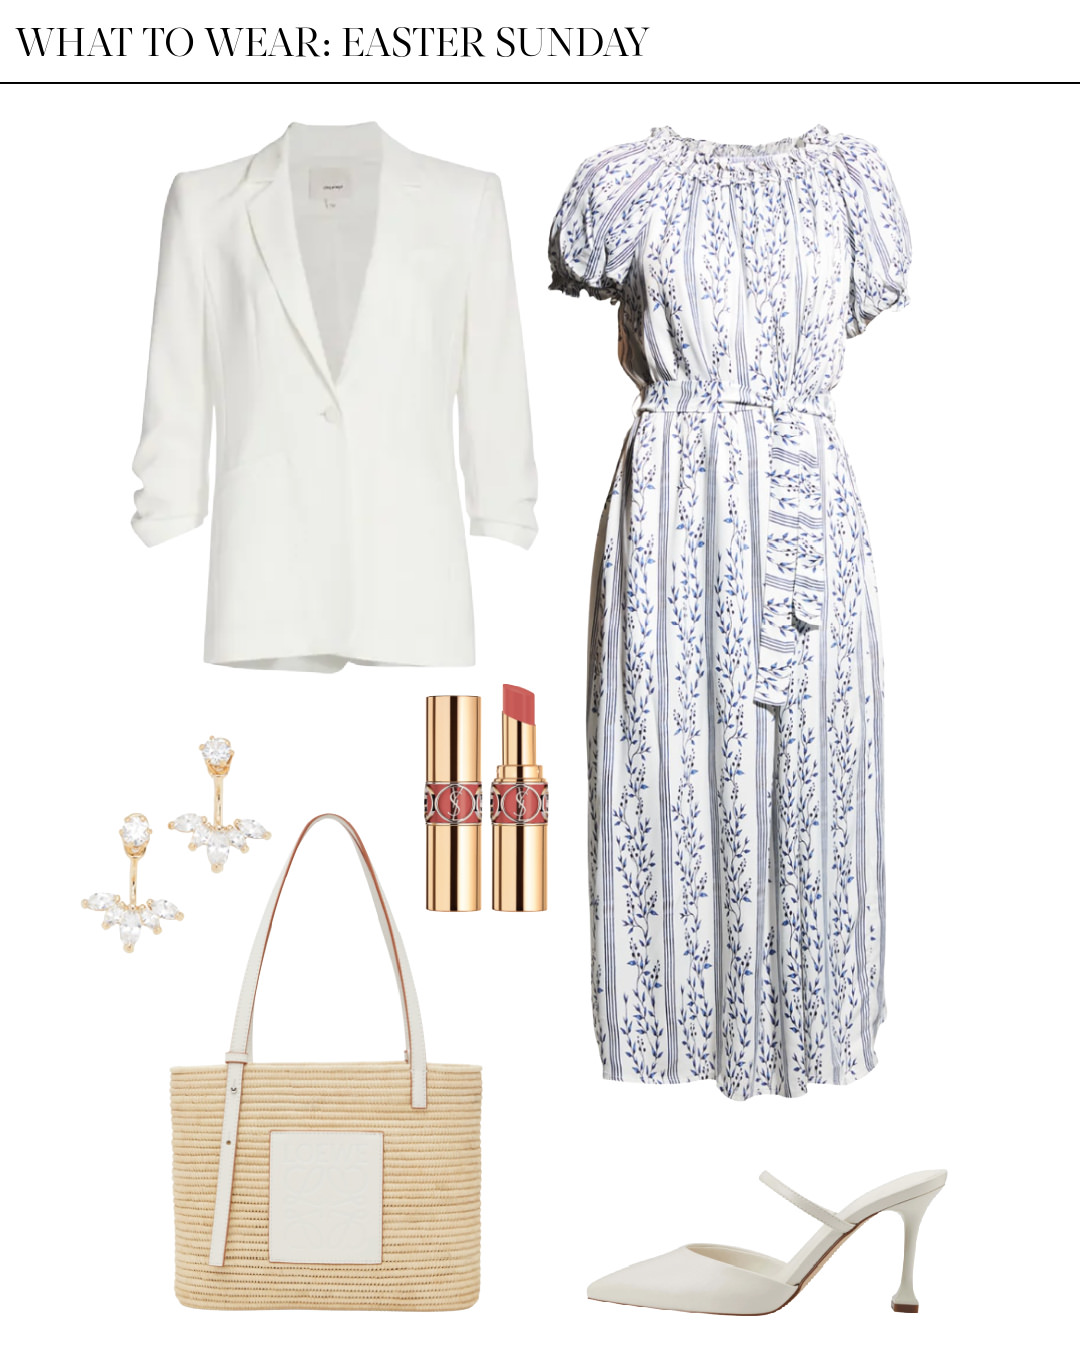 Easter Outfit Ideas: 5 Looks for Church, Brunch, & More